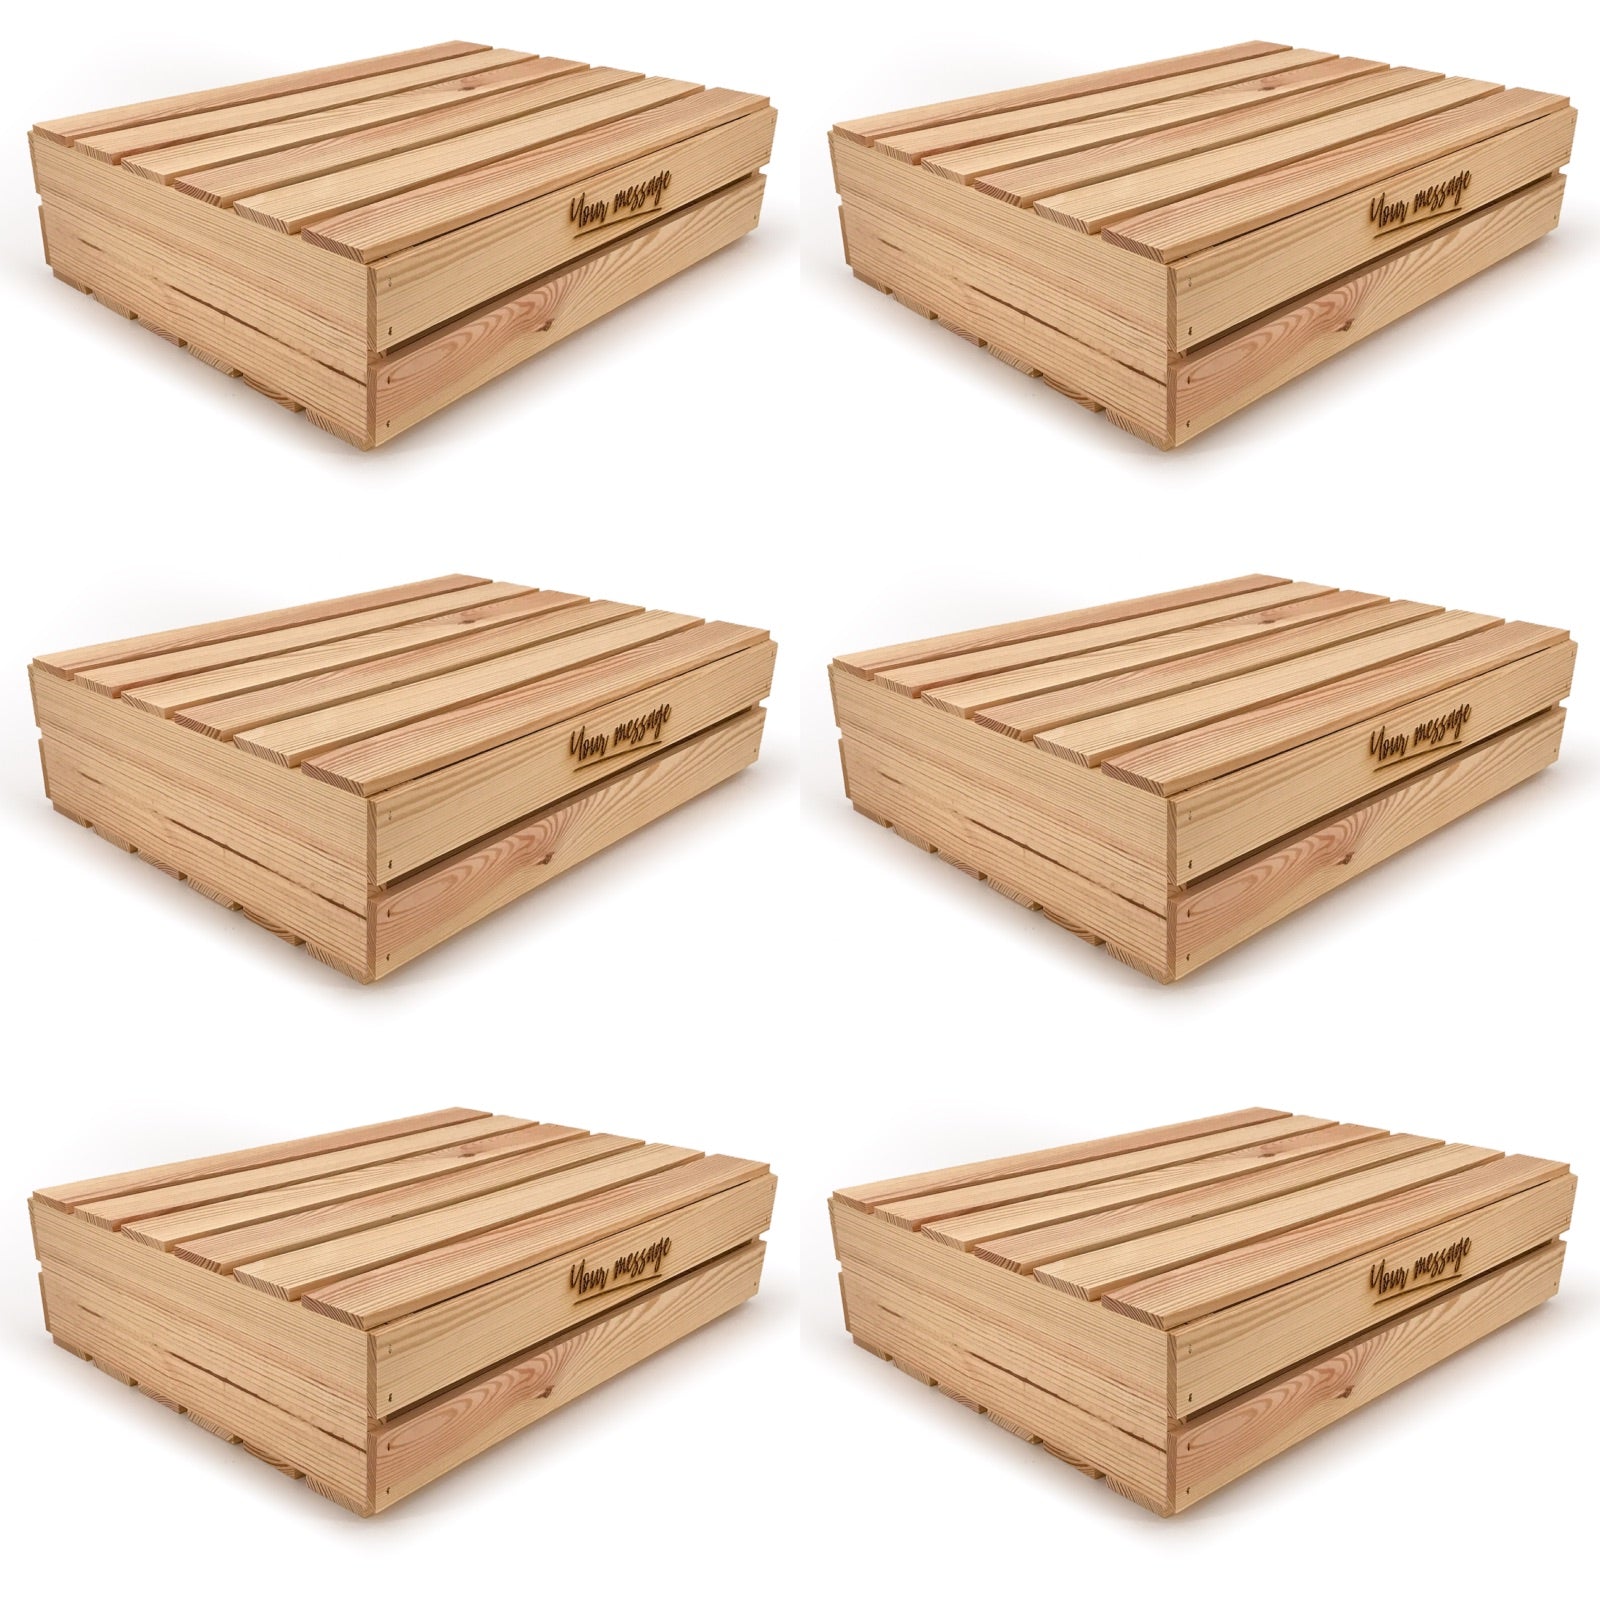 6 Small wooden crates with lid and custom message 22x17x5.25, 6-WS-22-17-5.25-ST-NW-LL, 12-WS-22-17-5.25-ST-NW-LL, 24-WS-22-17-5.25-ST-NW-LL, 48-WS-22-17-5.25-ST-NW-LL, 96-WS-22-17-5.25-ST-NW-LL